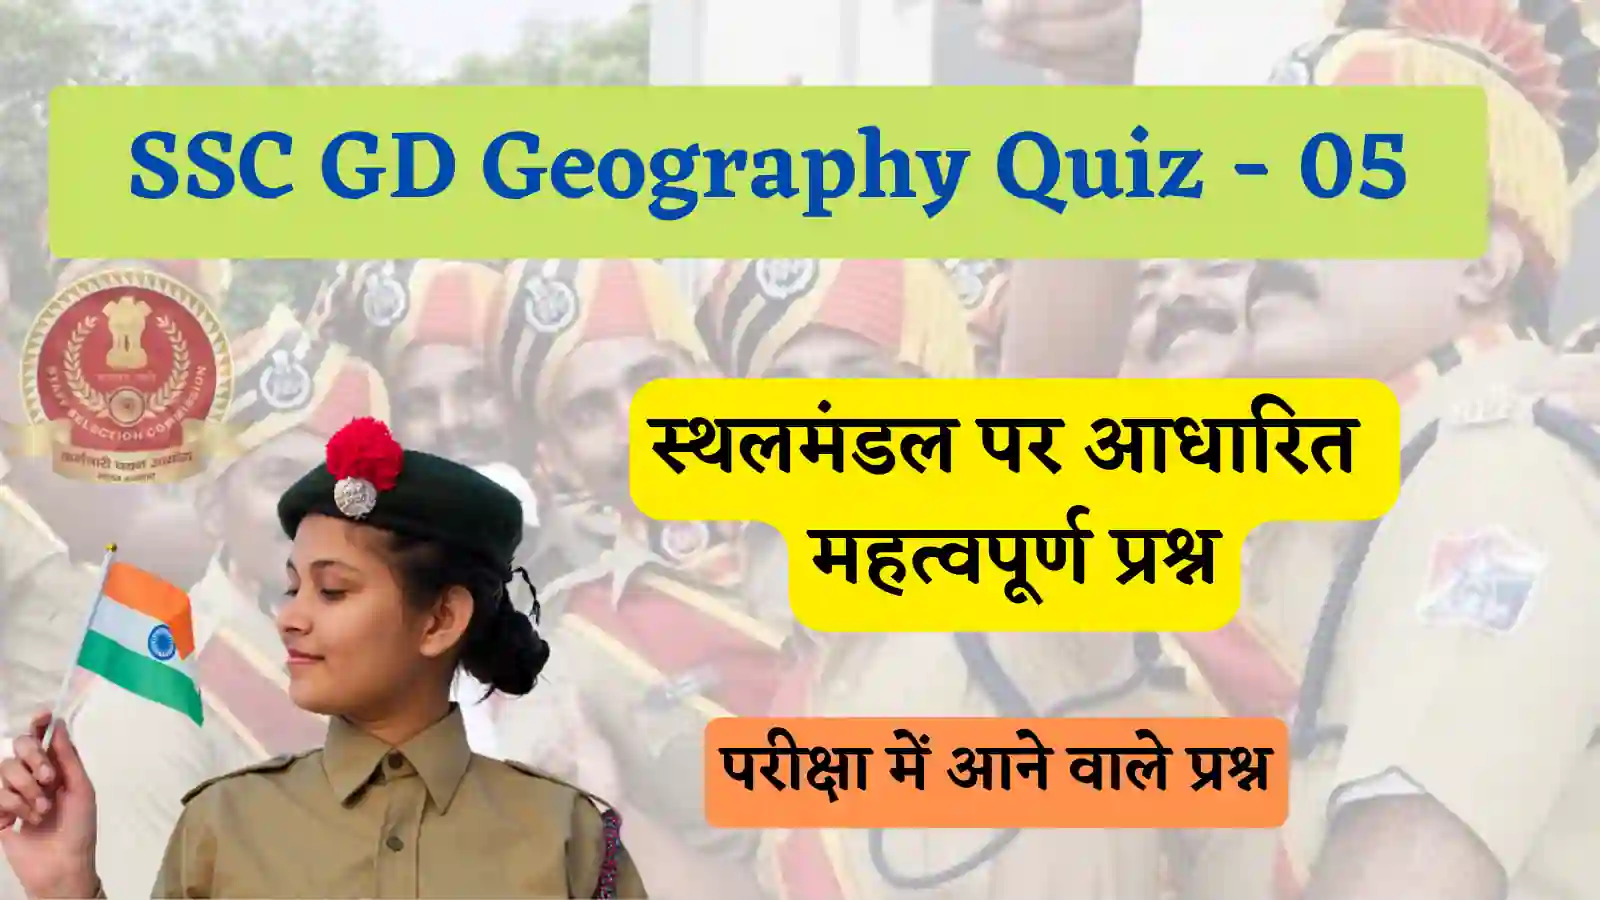 SSC GD Geography Quiz - 05